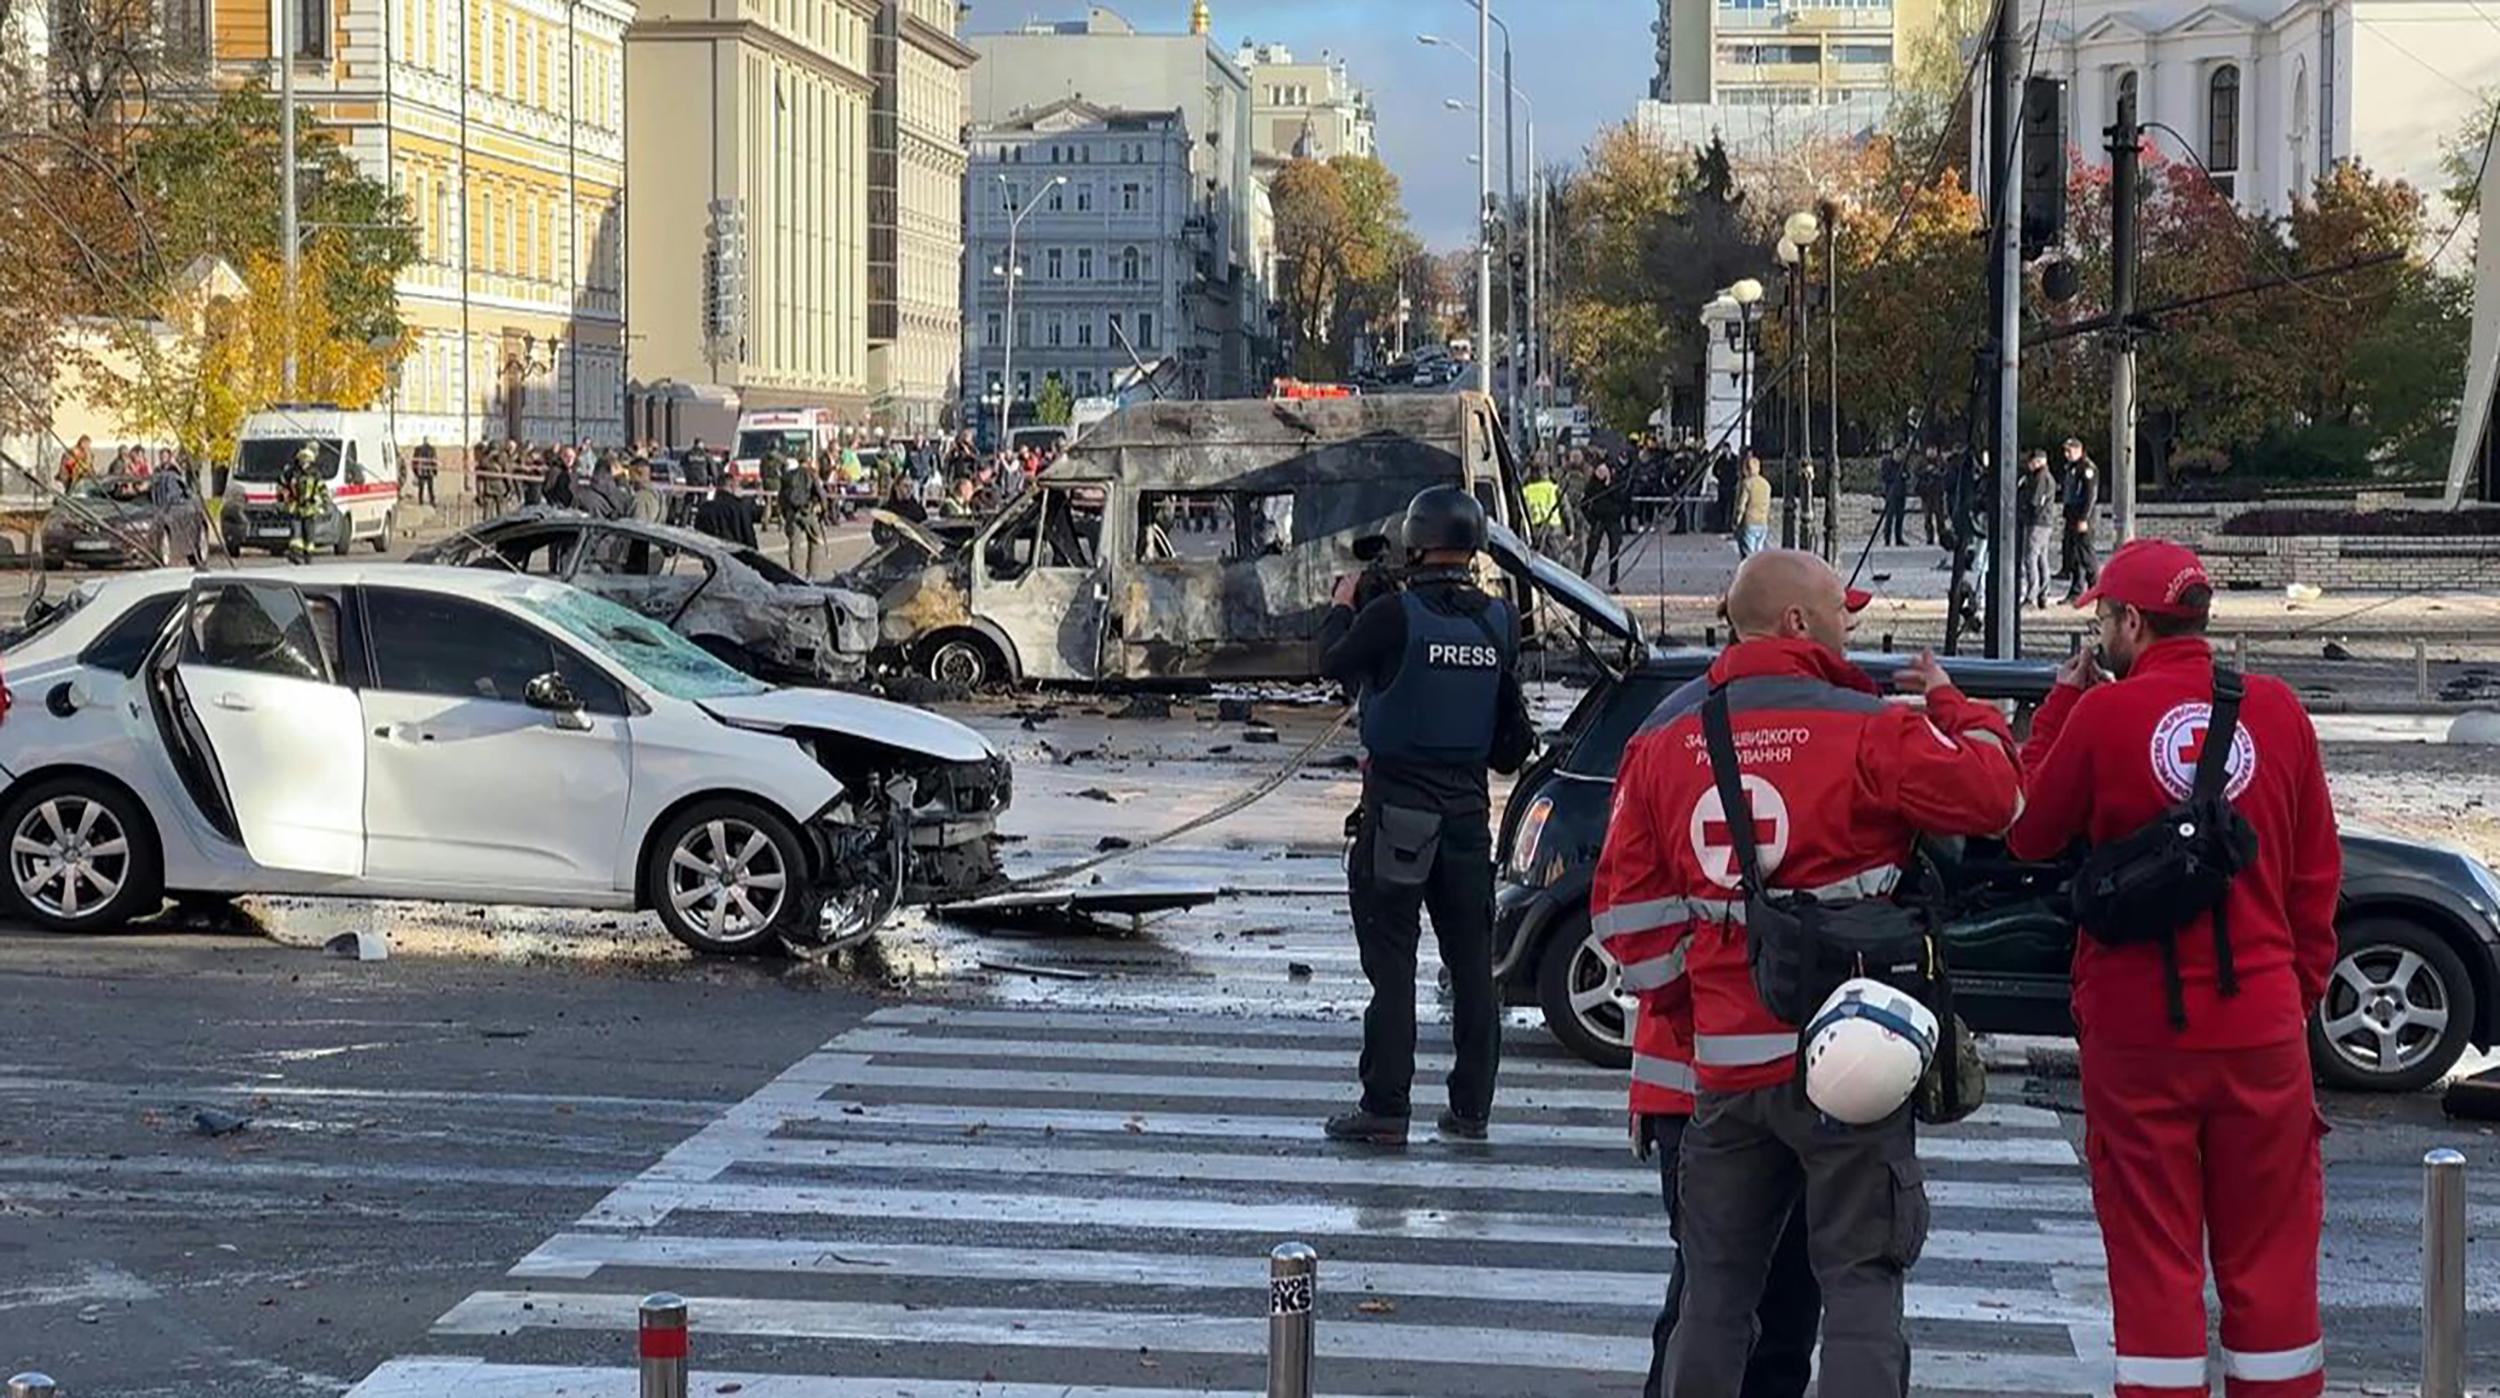 This video grab taken from an AFPTV footage shows vehicles destroyed in Kyiv on October 10, 2022 as security and emergency forces work on the scene after several missile strikes were heard in the Ukrainian capital. (Photo by Arman SOLDIN / AFPTV / AFP)